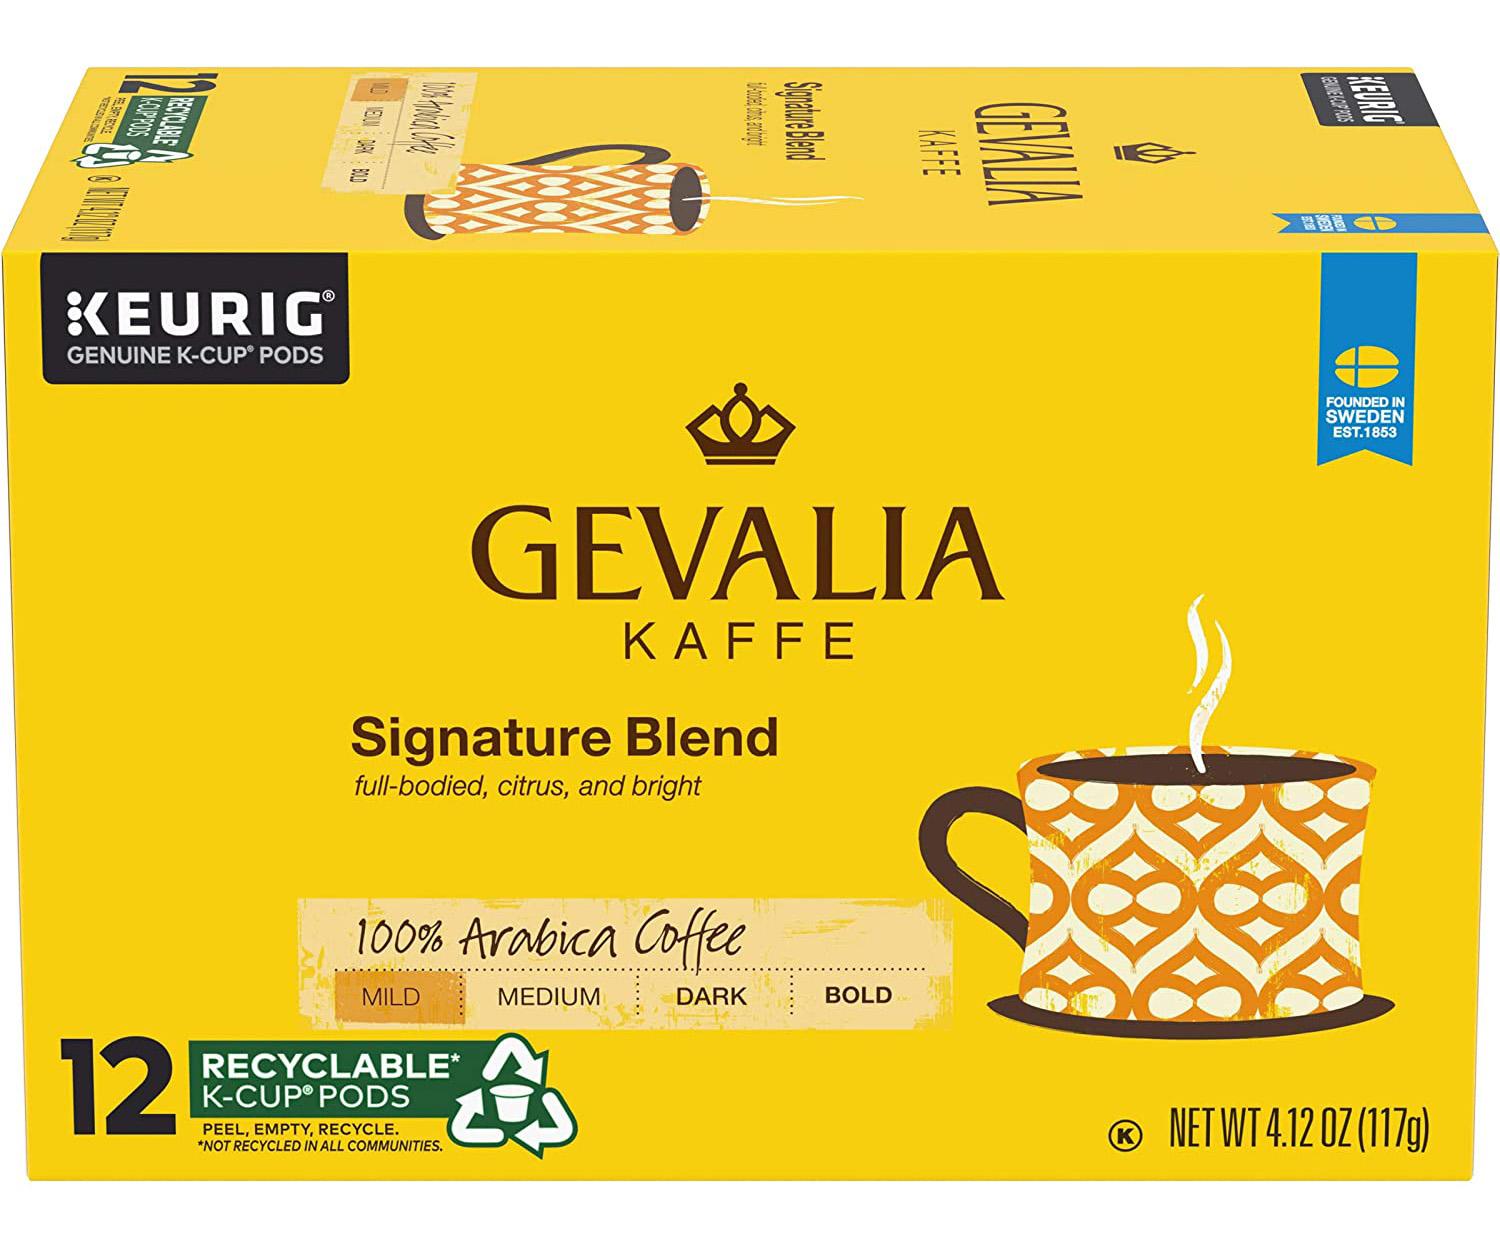 72 Gevalia Signature Blend Keurig K-Cup Coffee Pods for $21.96 Shipped